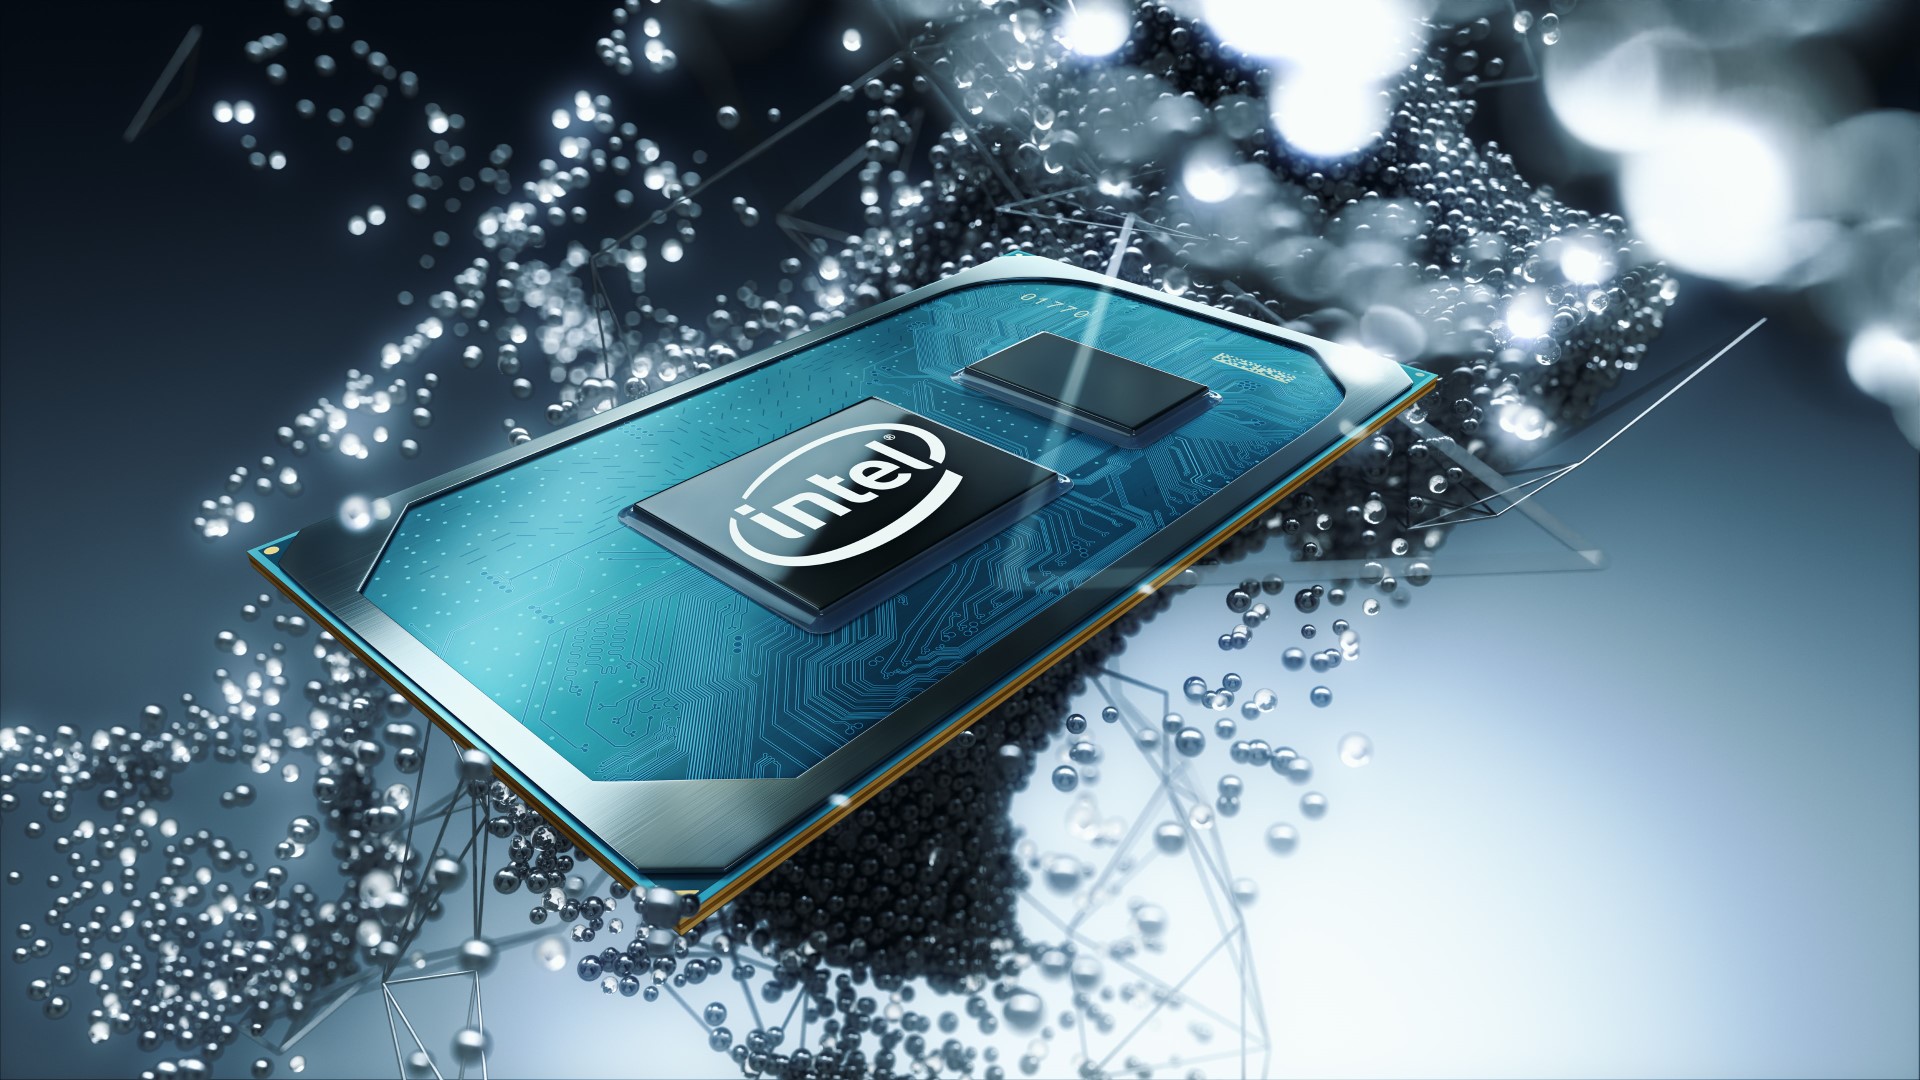 At CES 2020, Intel previewed upcoming mobile PC processors code-named “Tiger Lake.” Tiger Lake’s new capabilities, built on Intel’s 10nm+ process and integrated with new Intel Xe graphics architecture, are expected to deliver massive gains over 10th Gen Intel Core processors. First systems are expected to ship this year. (Credit: Intel Corporation)